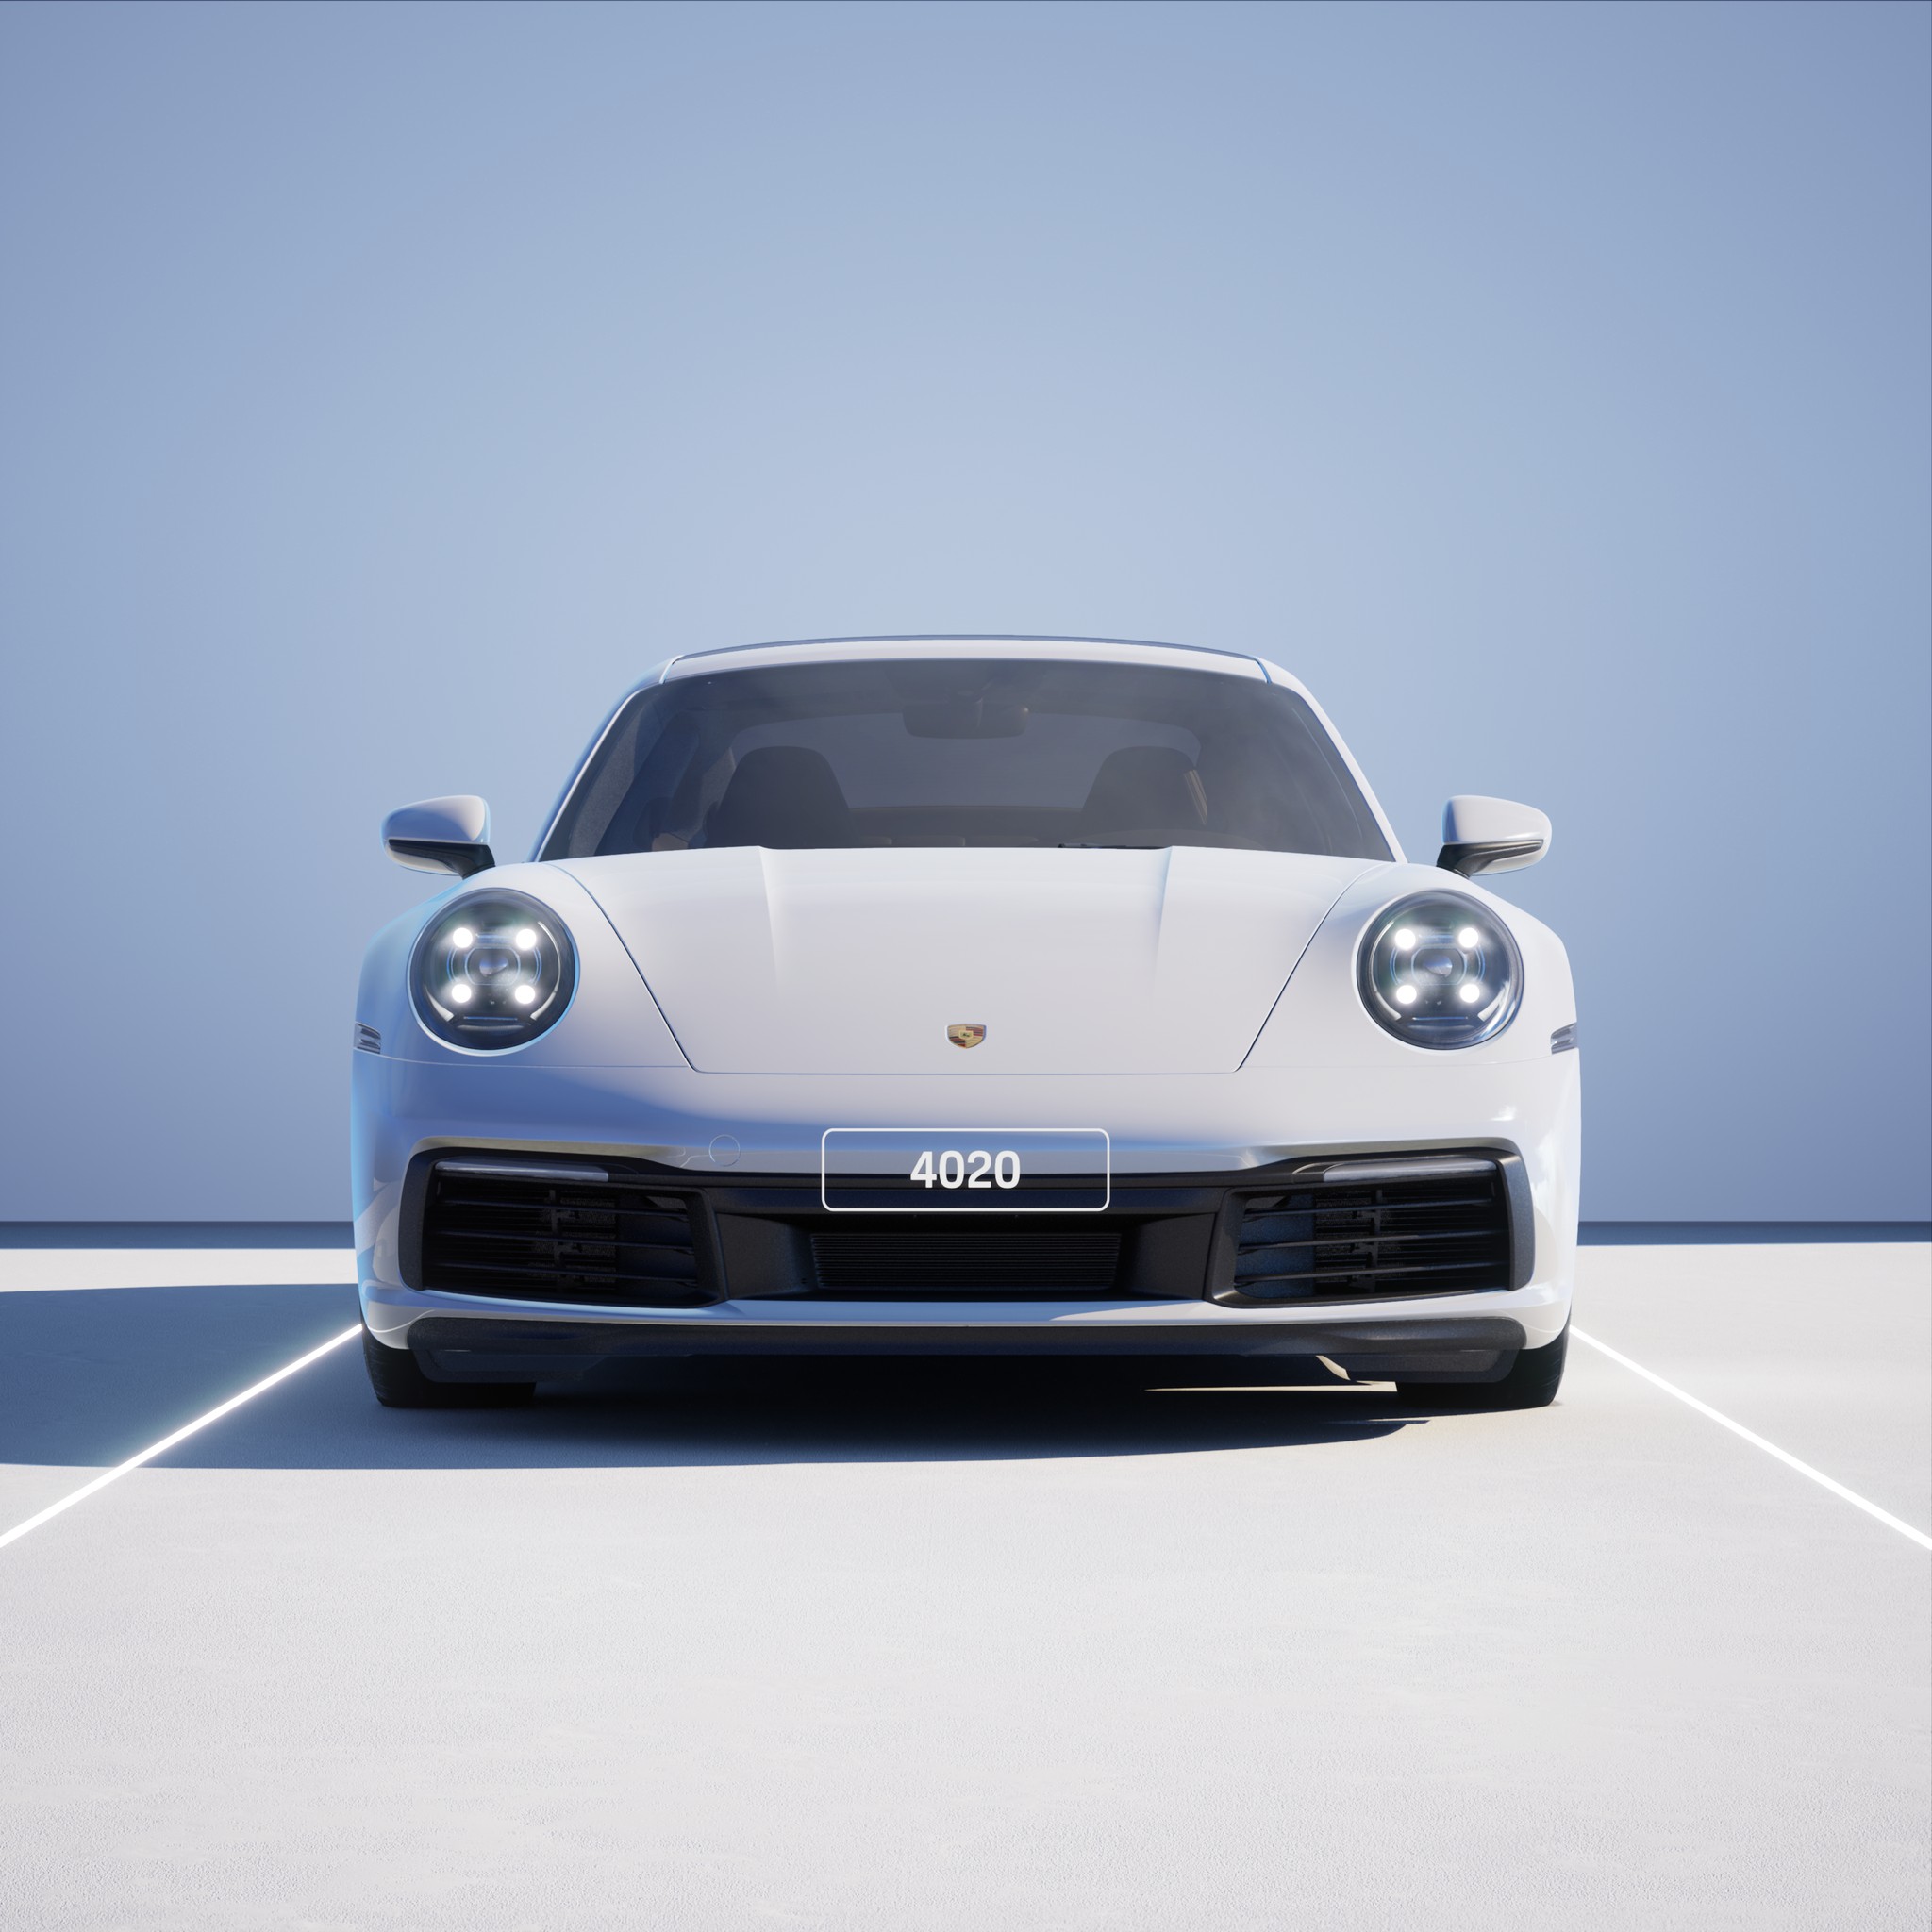 The PORSCHΞ 911 4020 image in phase